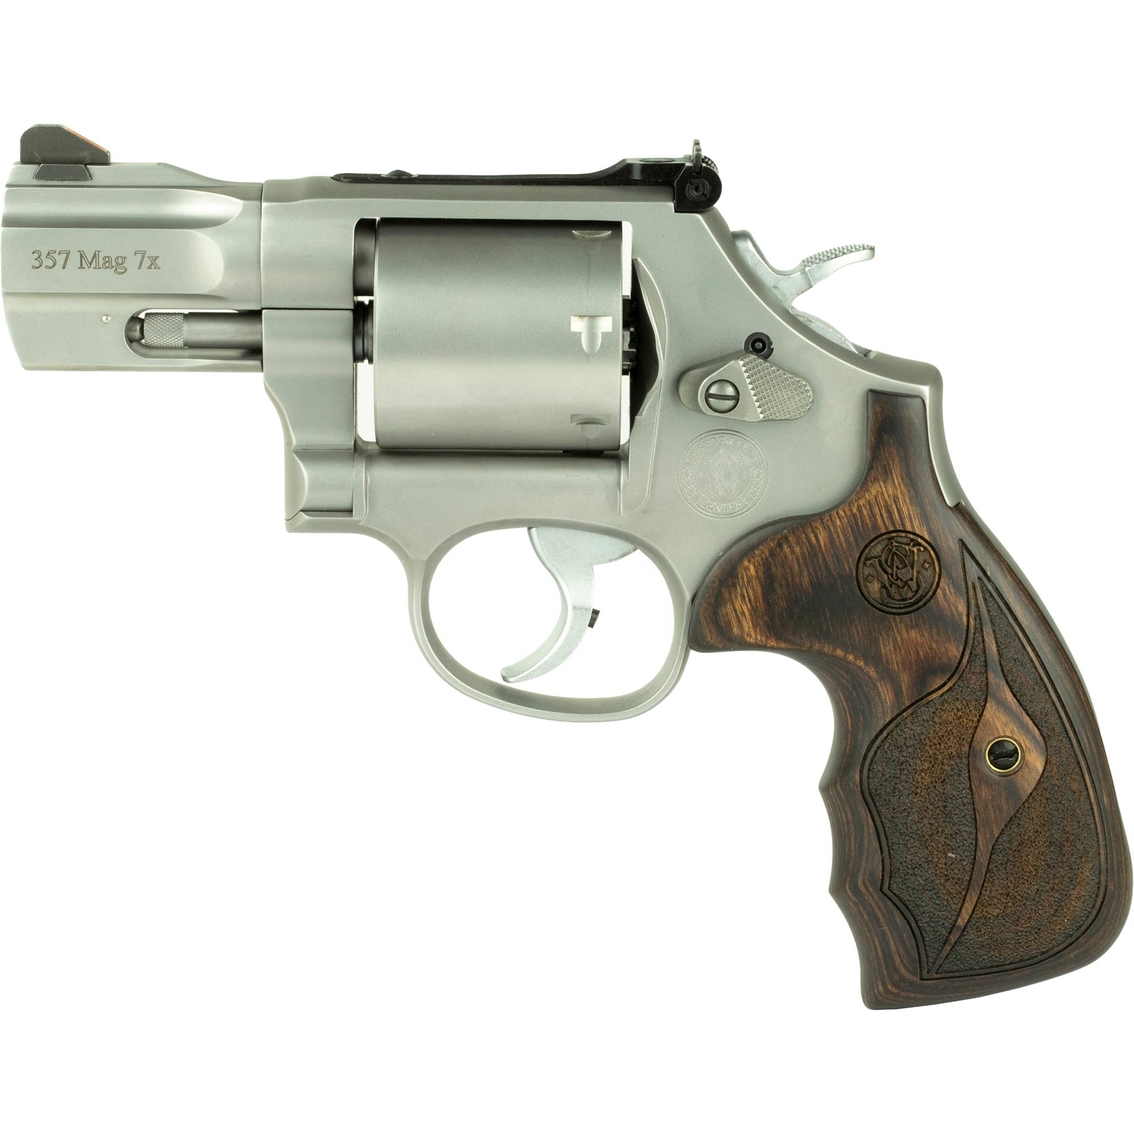 S&W 686PC 357 Mag 2.5 in. Barrel 7 Rnd Revolver Stainless Steel - Image 2 of 3